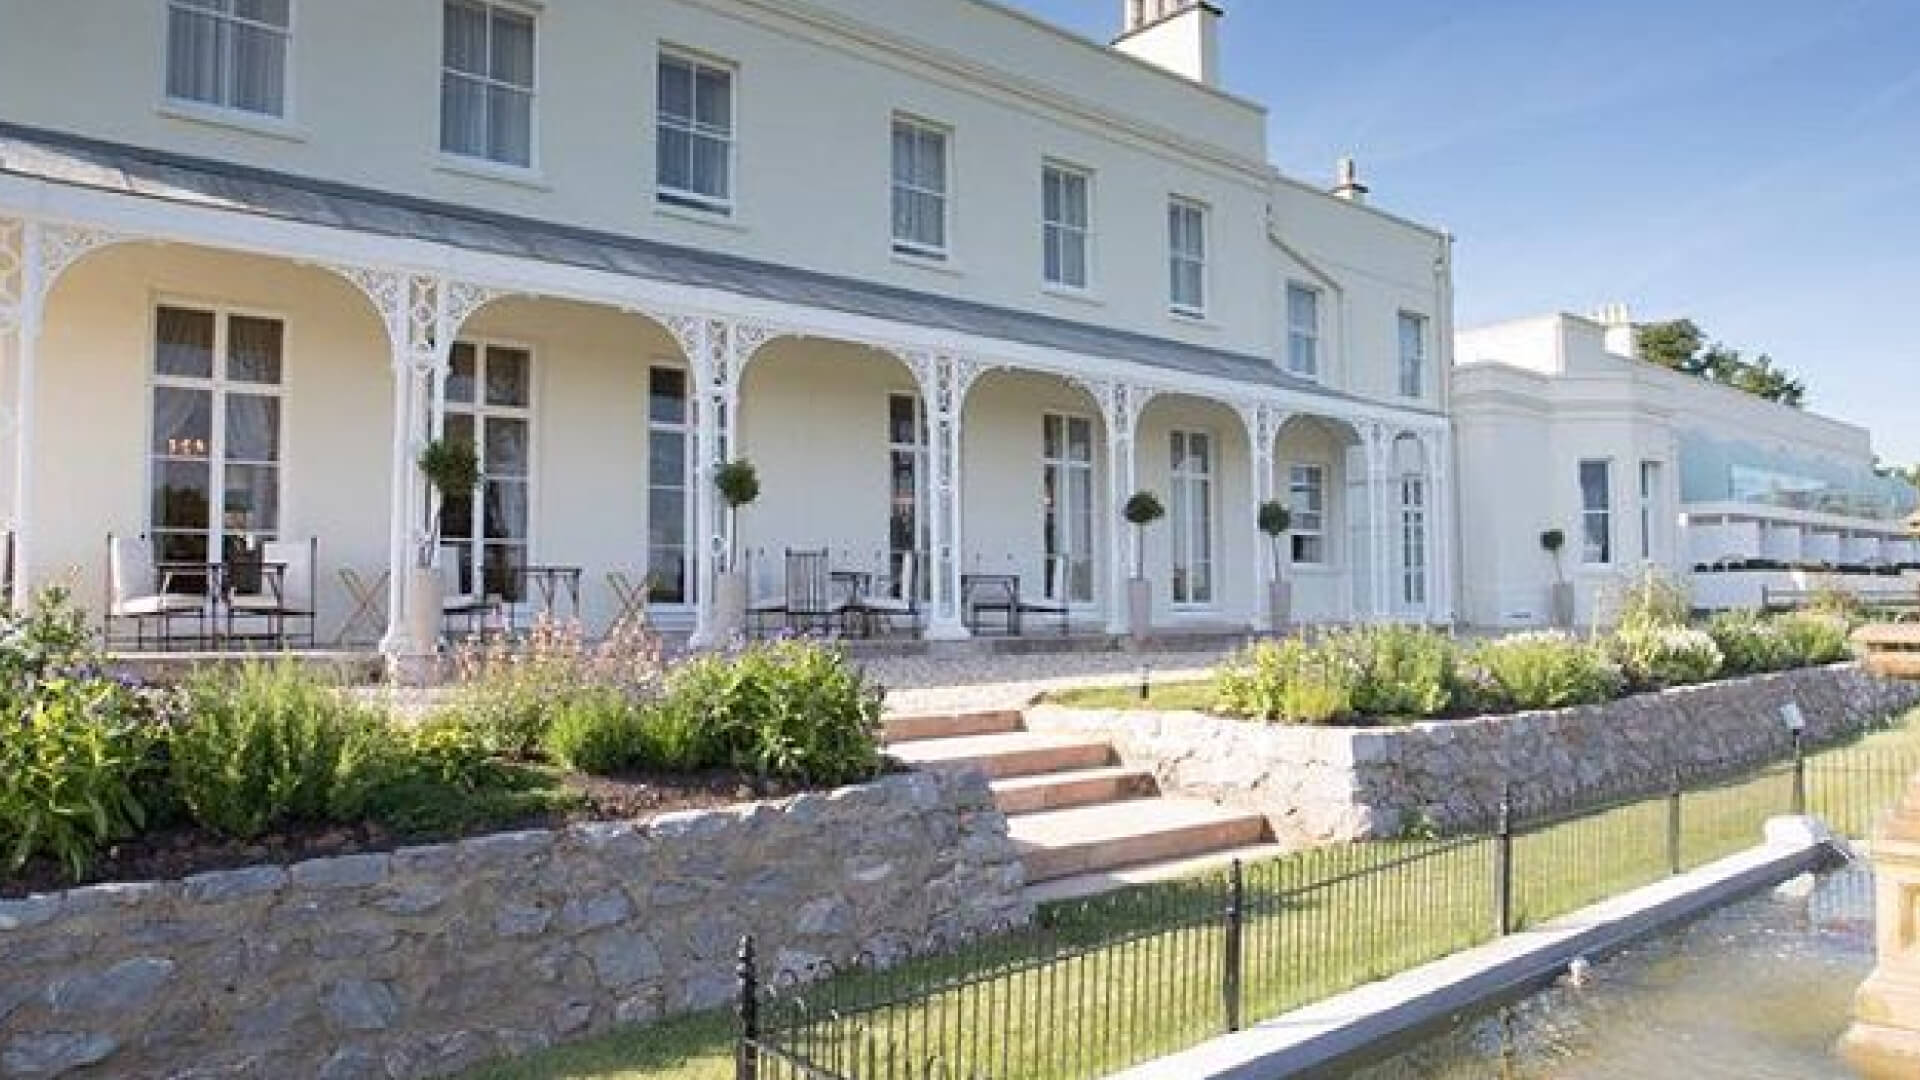 The renovation of country house hotel overlooking the Exe Estuary with 21 luxurious guestrooms and suites.